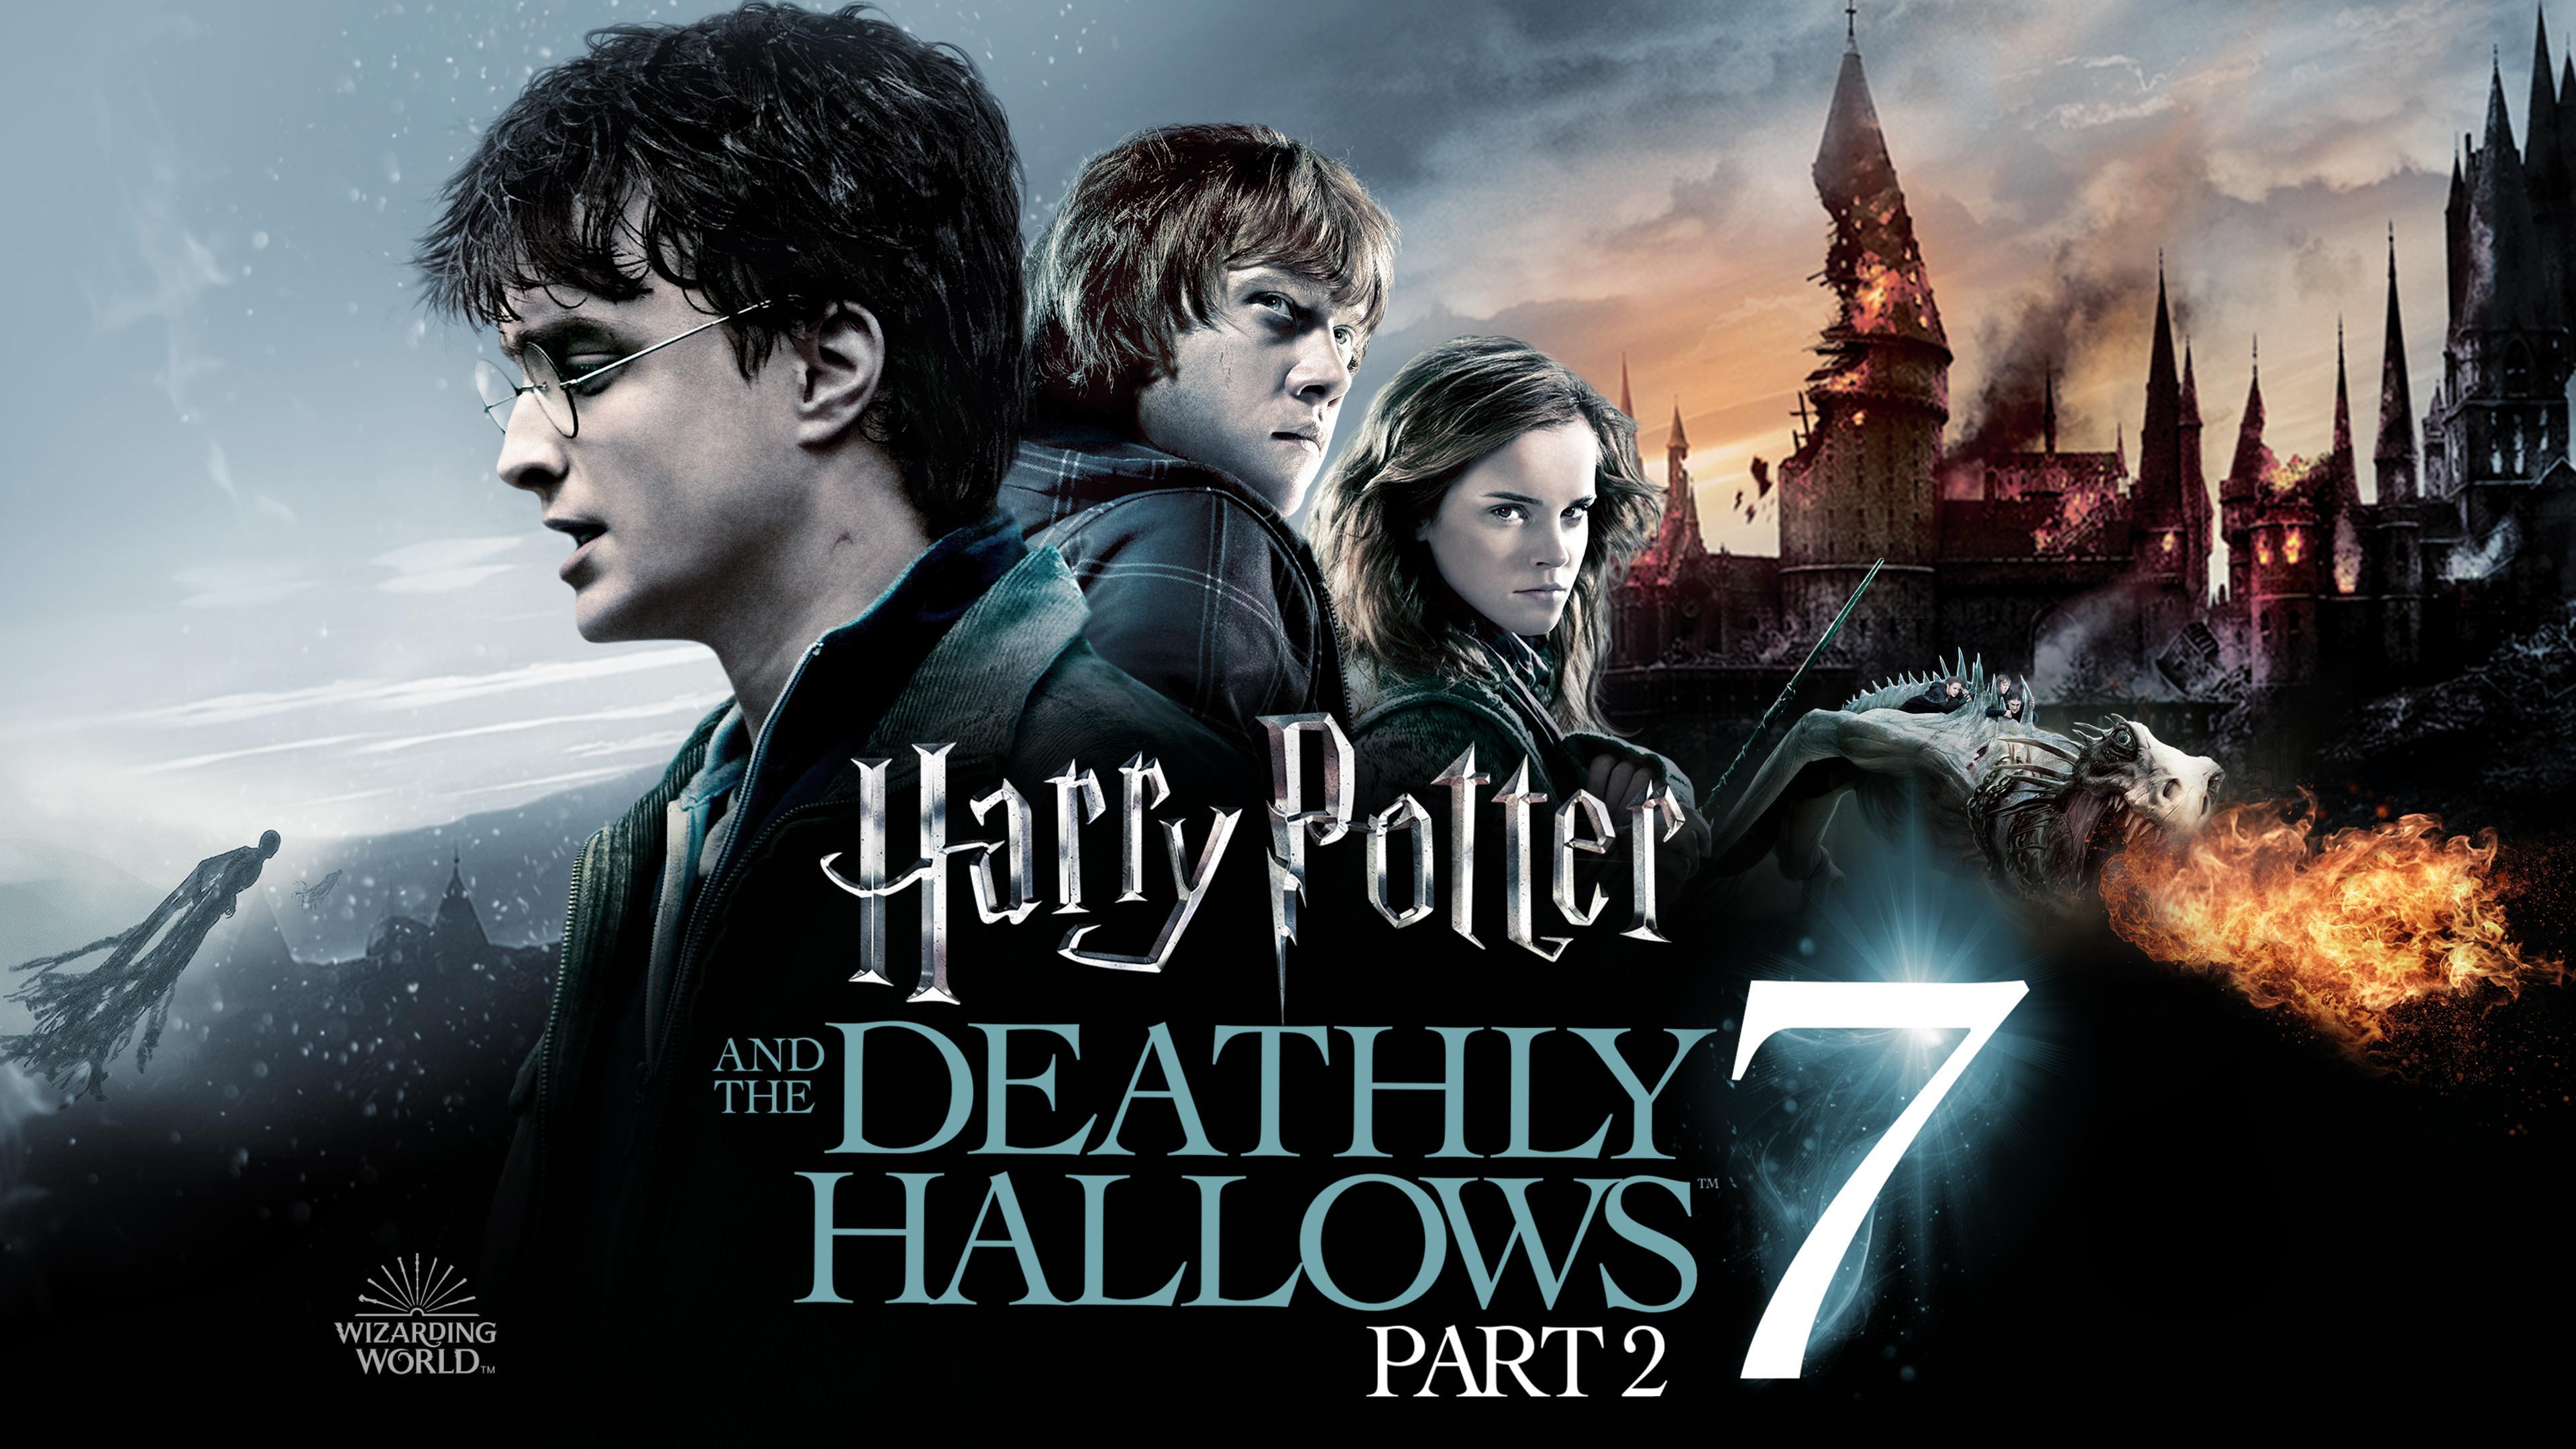 Watch Harry Potter and the Deathly Hallows - Part 2